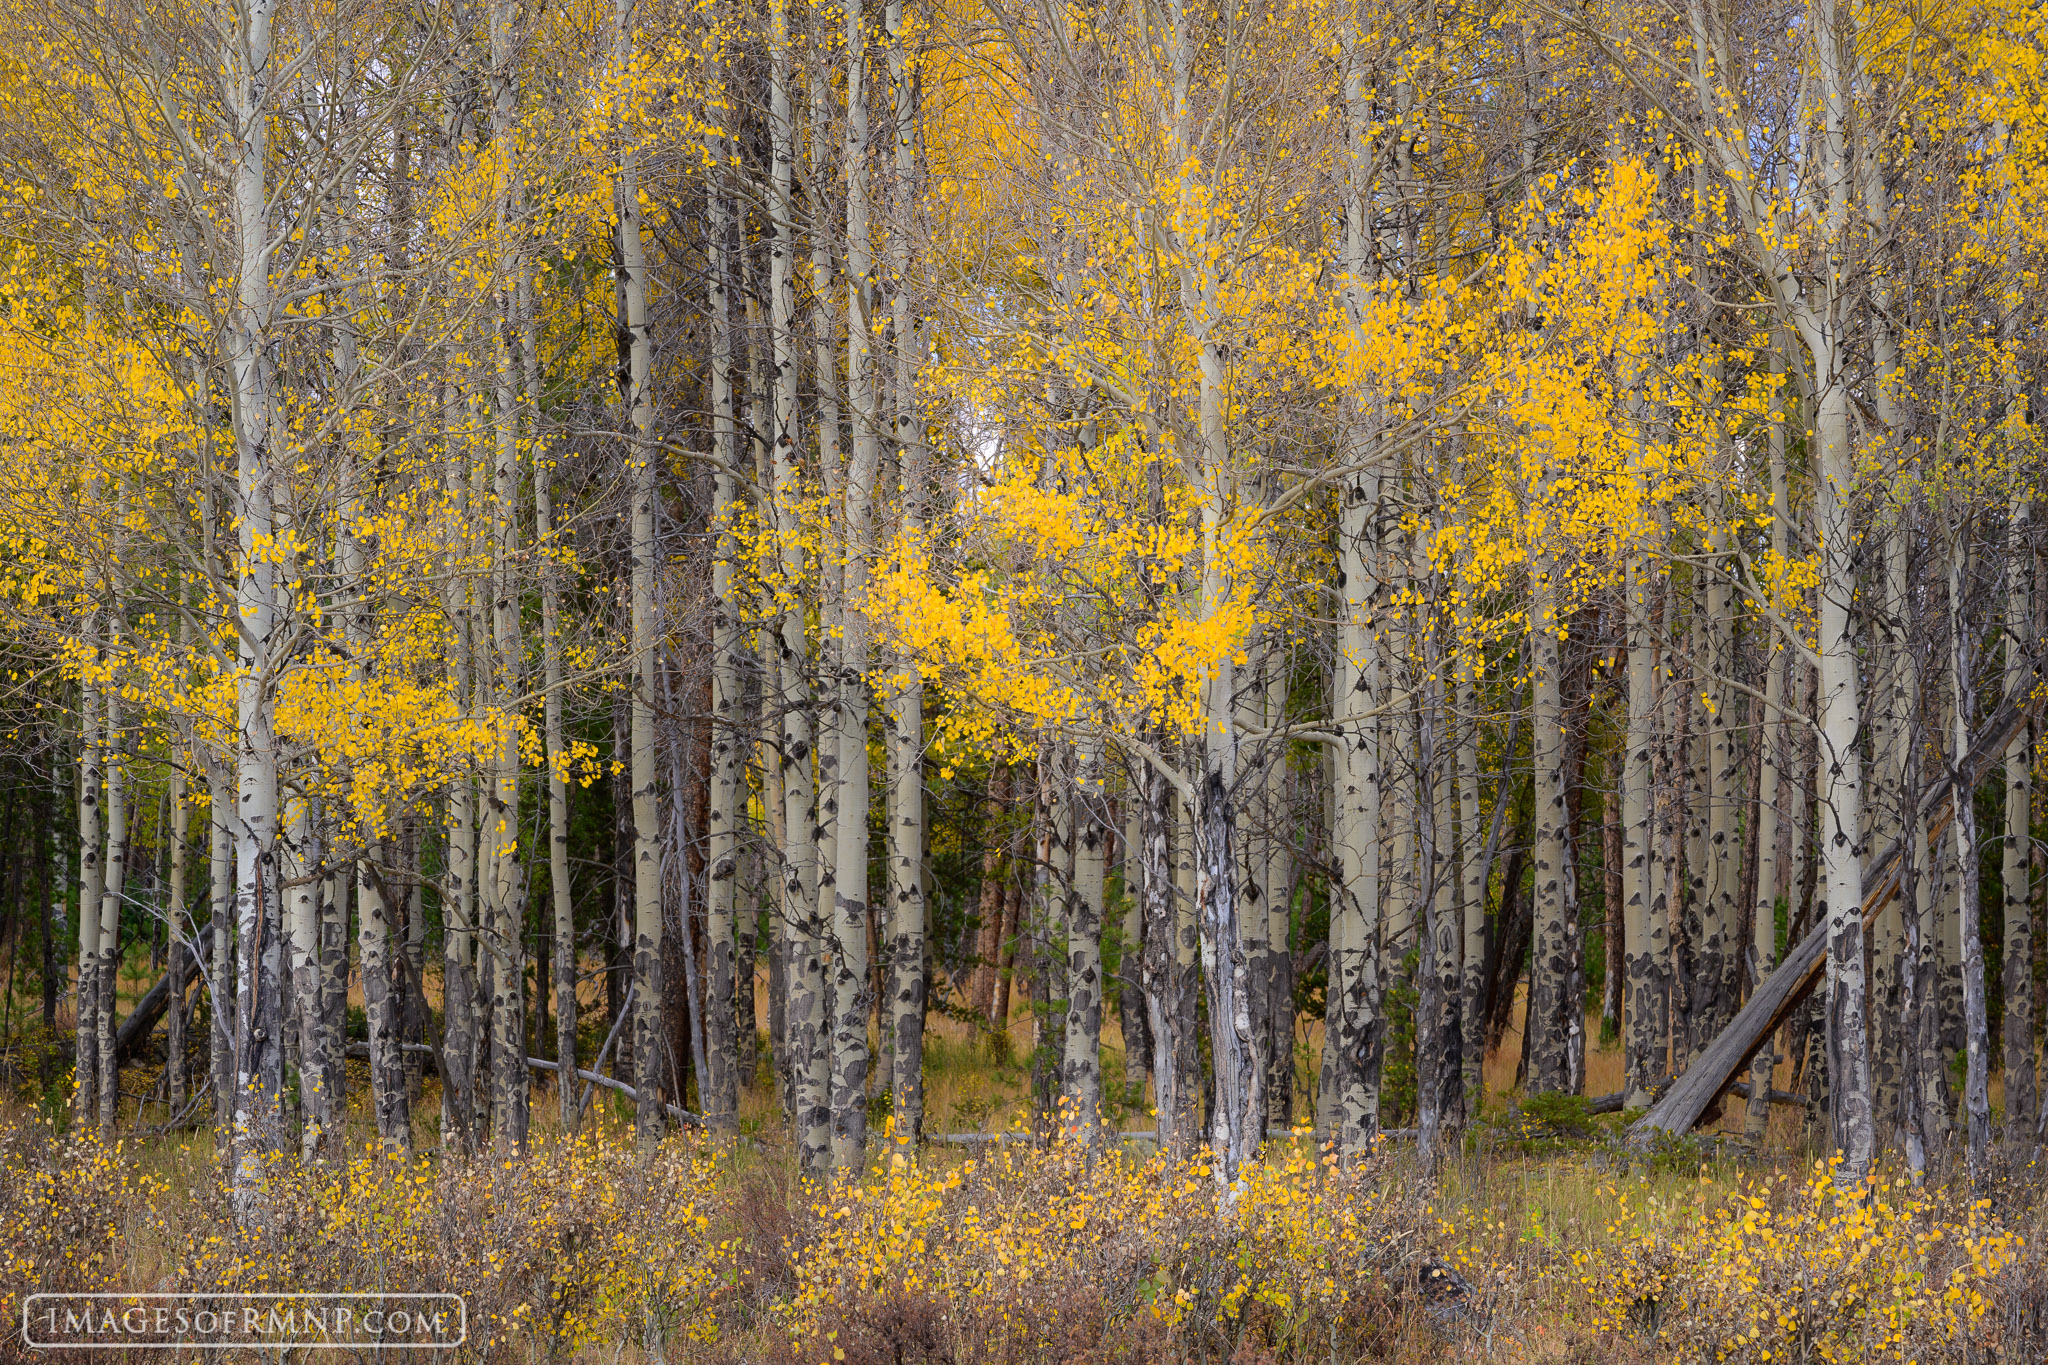 Each autumn I’m drawn to this same grove of aspen, marveling at how different it can be from year to year. This autumn the...